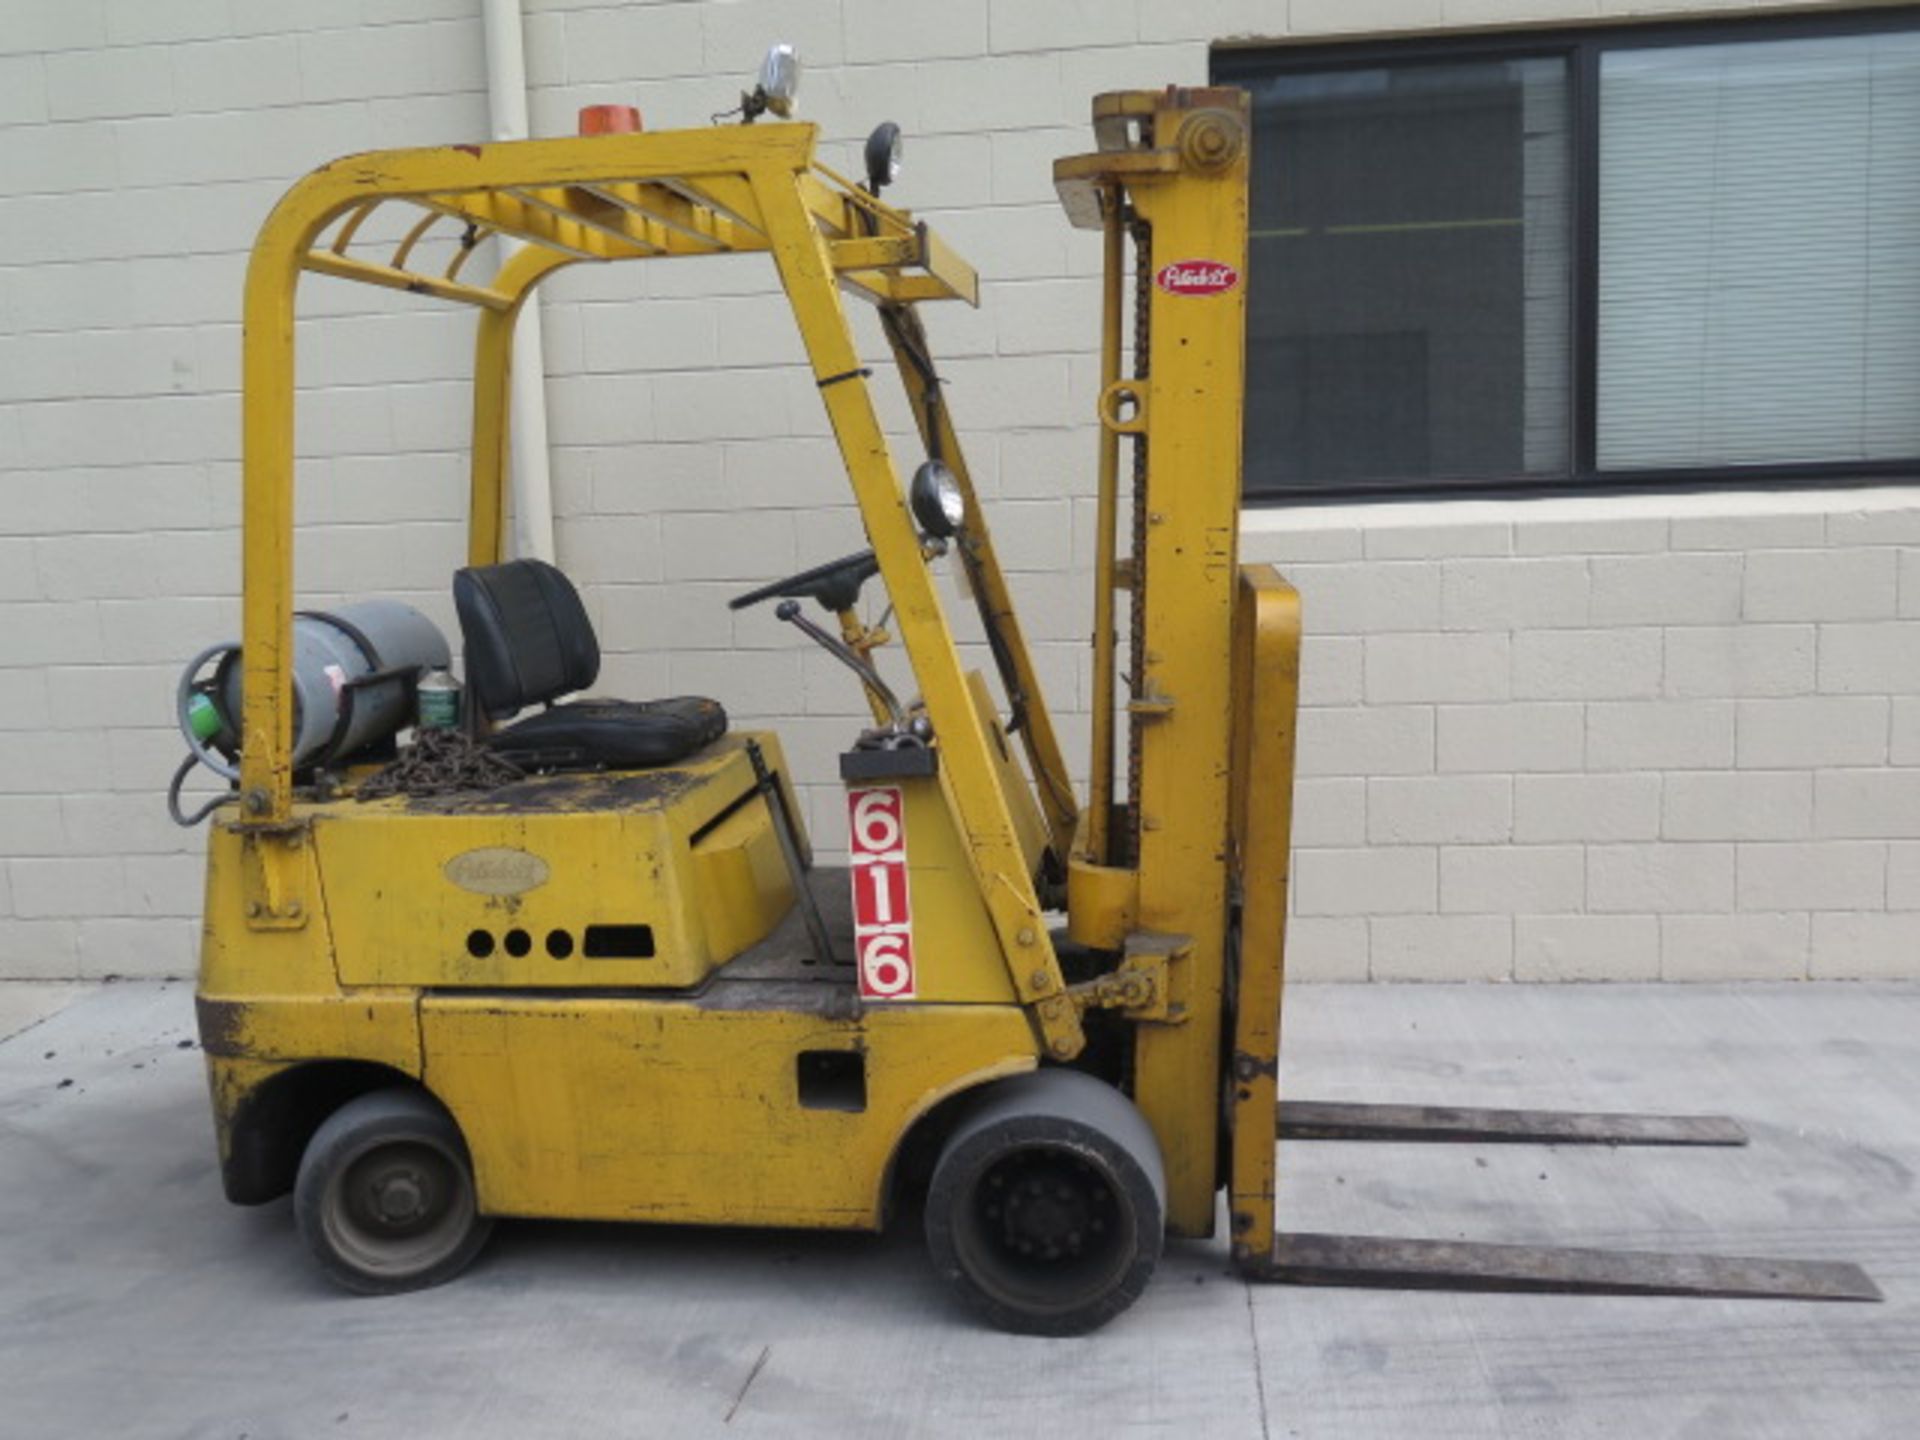 Toyota 02-FGC25 2400 Lb Cap LPG Forklift s/n 02-FGC25-10908 w/ 3-Stage Mast, 185” Lift Height,